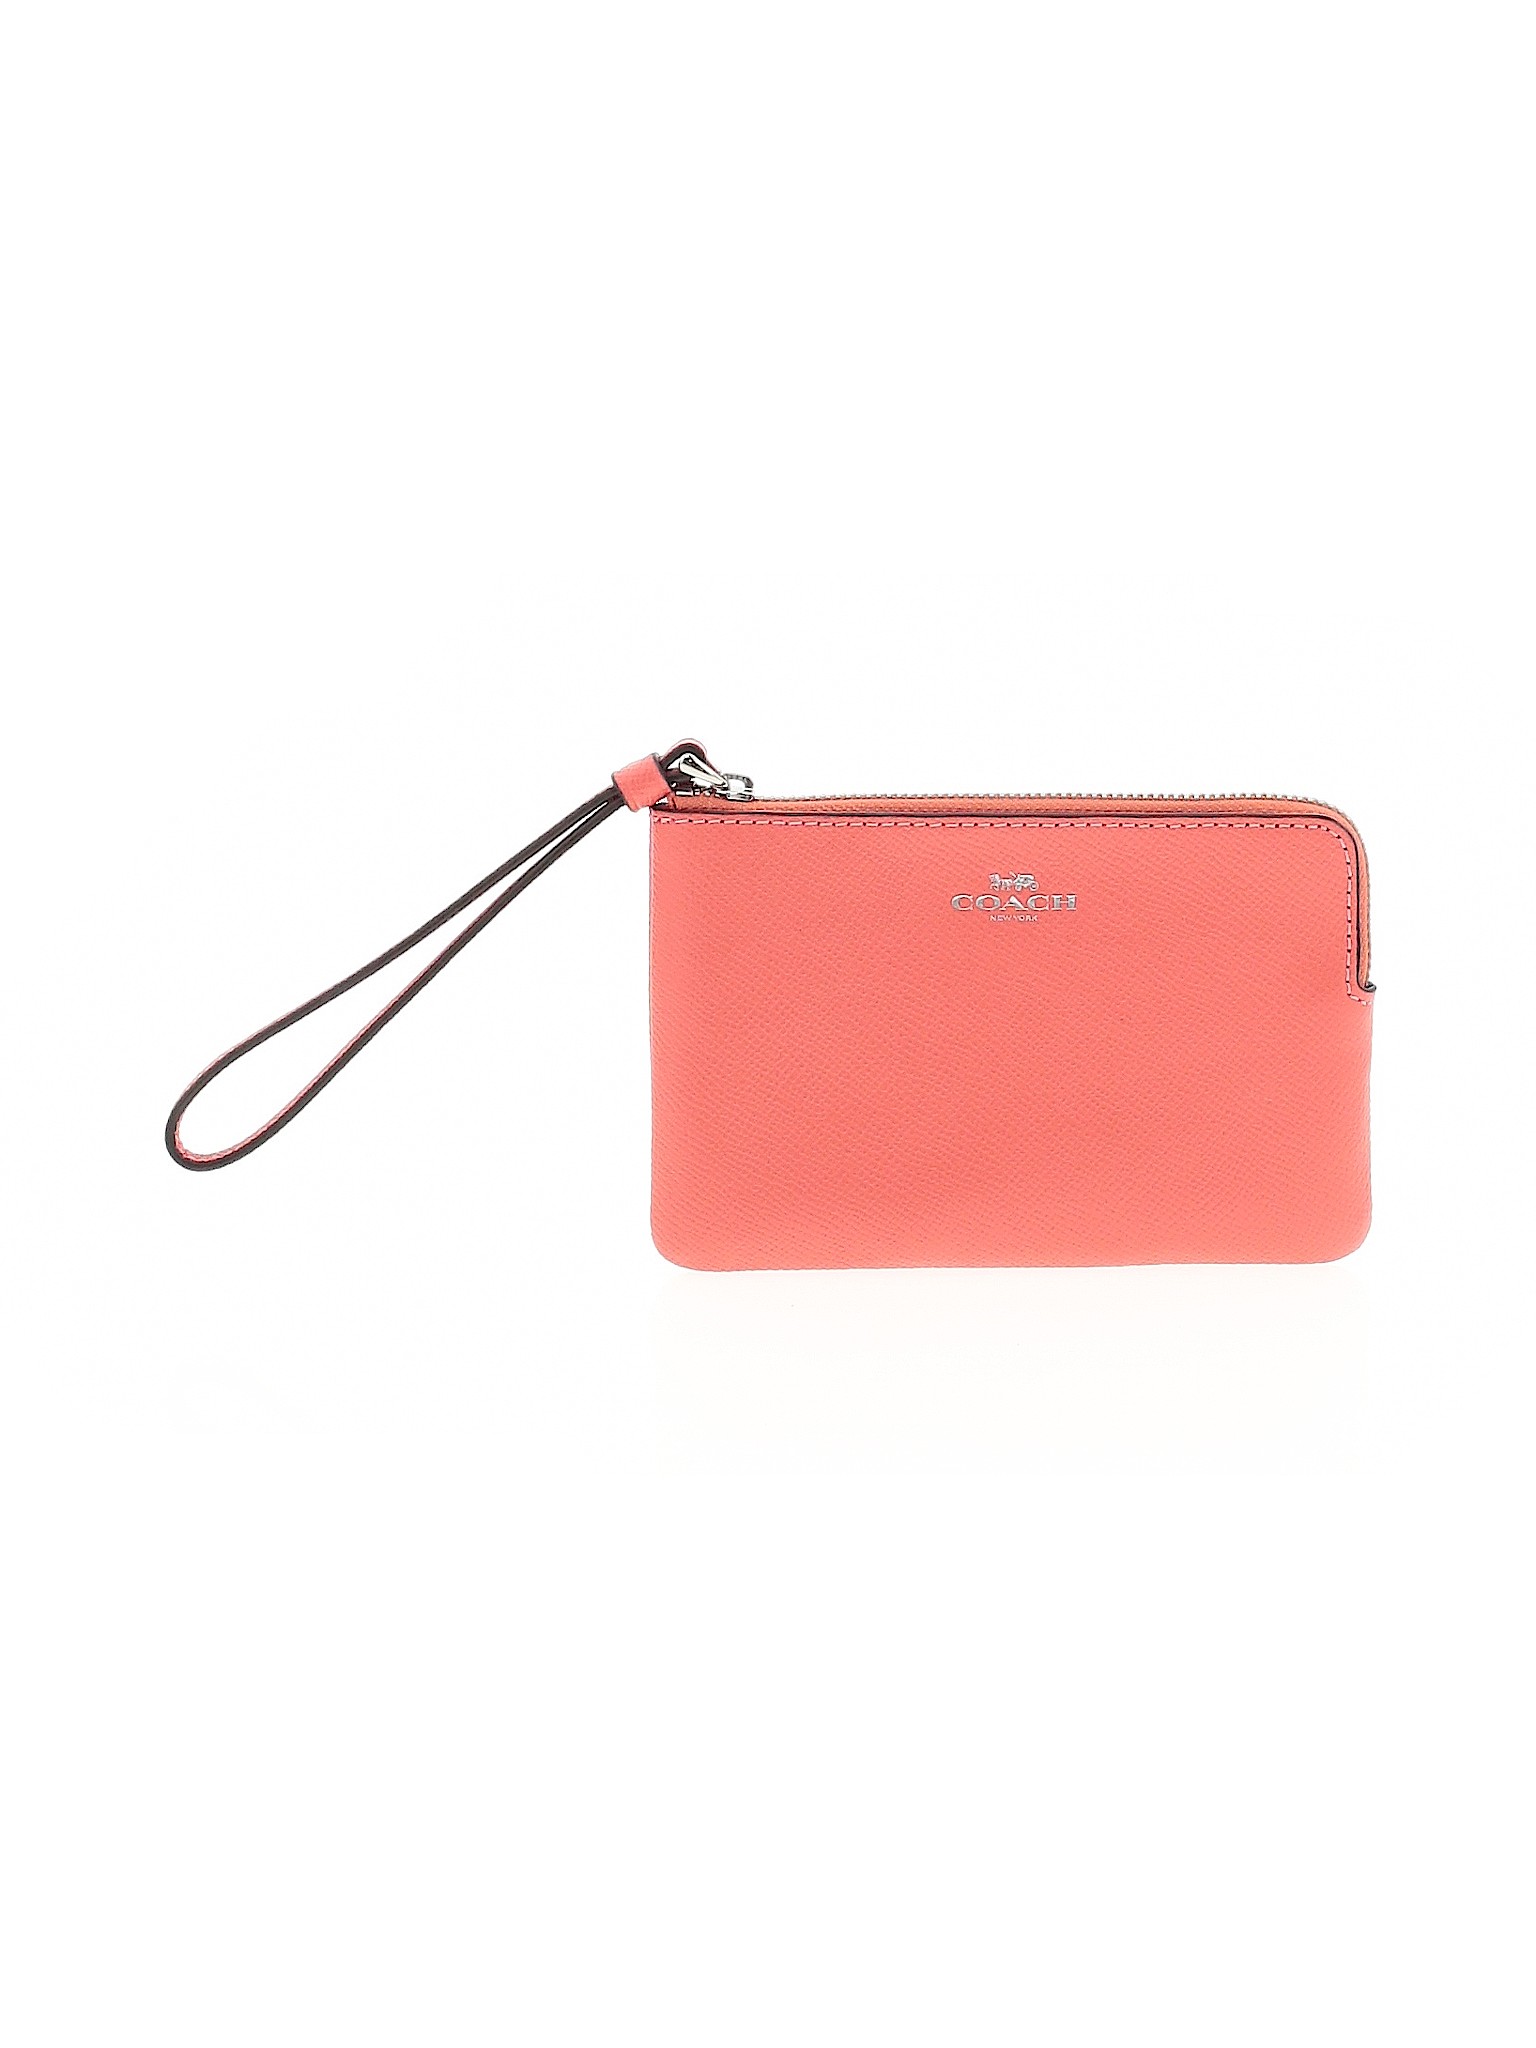 Coach Factory 100% Canvas Solid Pink Orange Leather Wristlet One Size - 65% off | thredUP